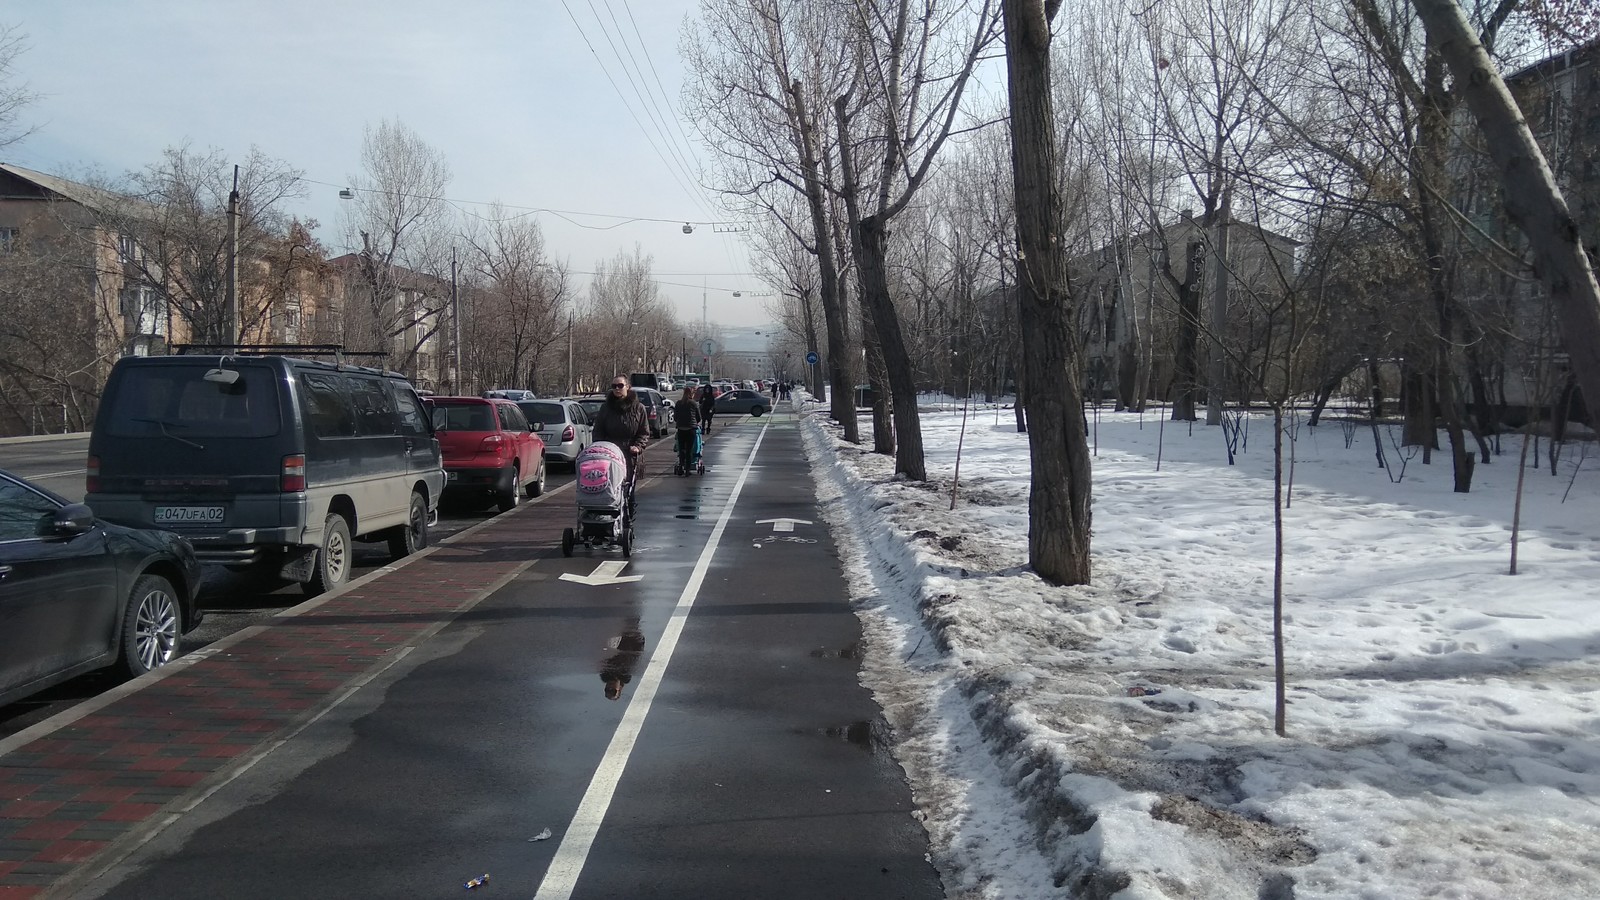 The cycling season has not yet begun, but the mothers with strollers are already here - My, Bike path, Mum, Almaty